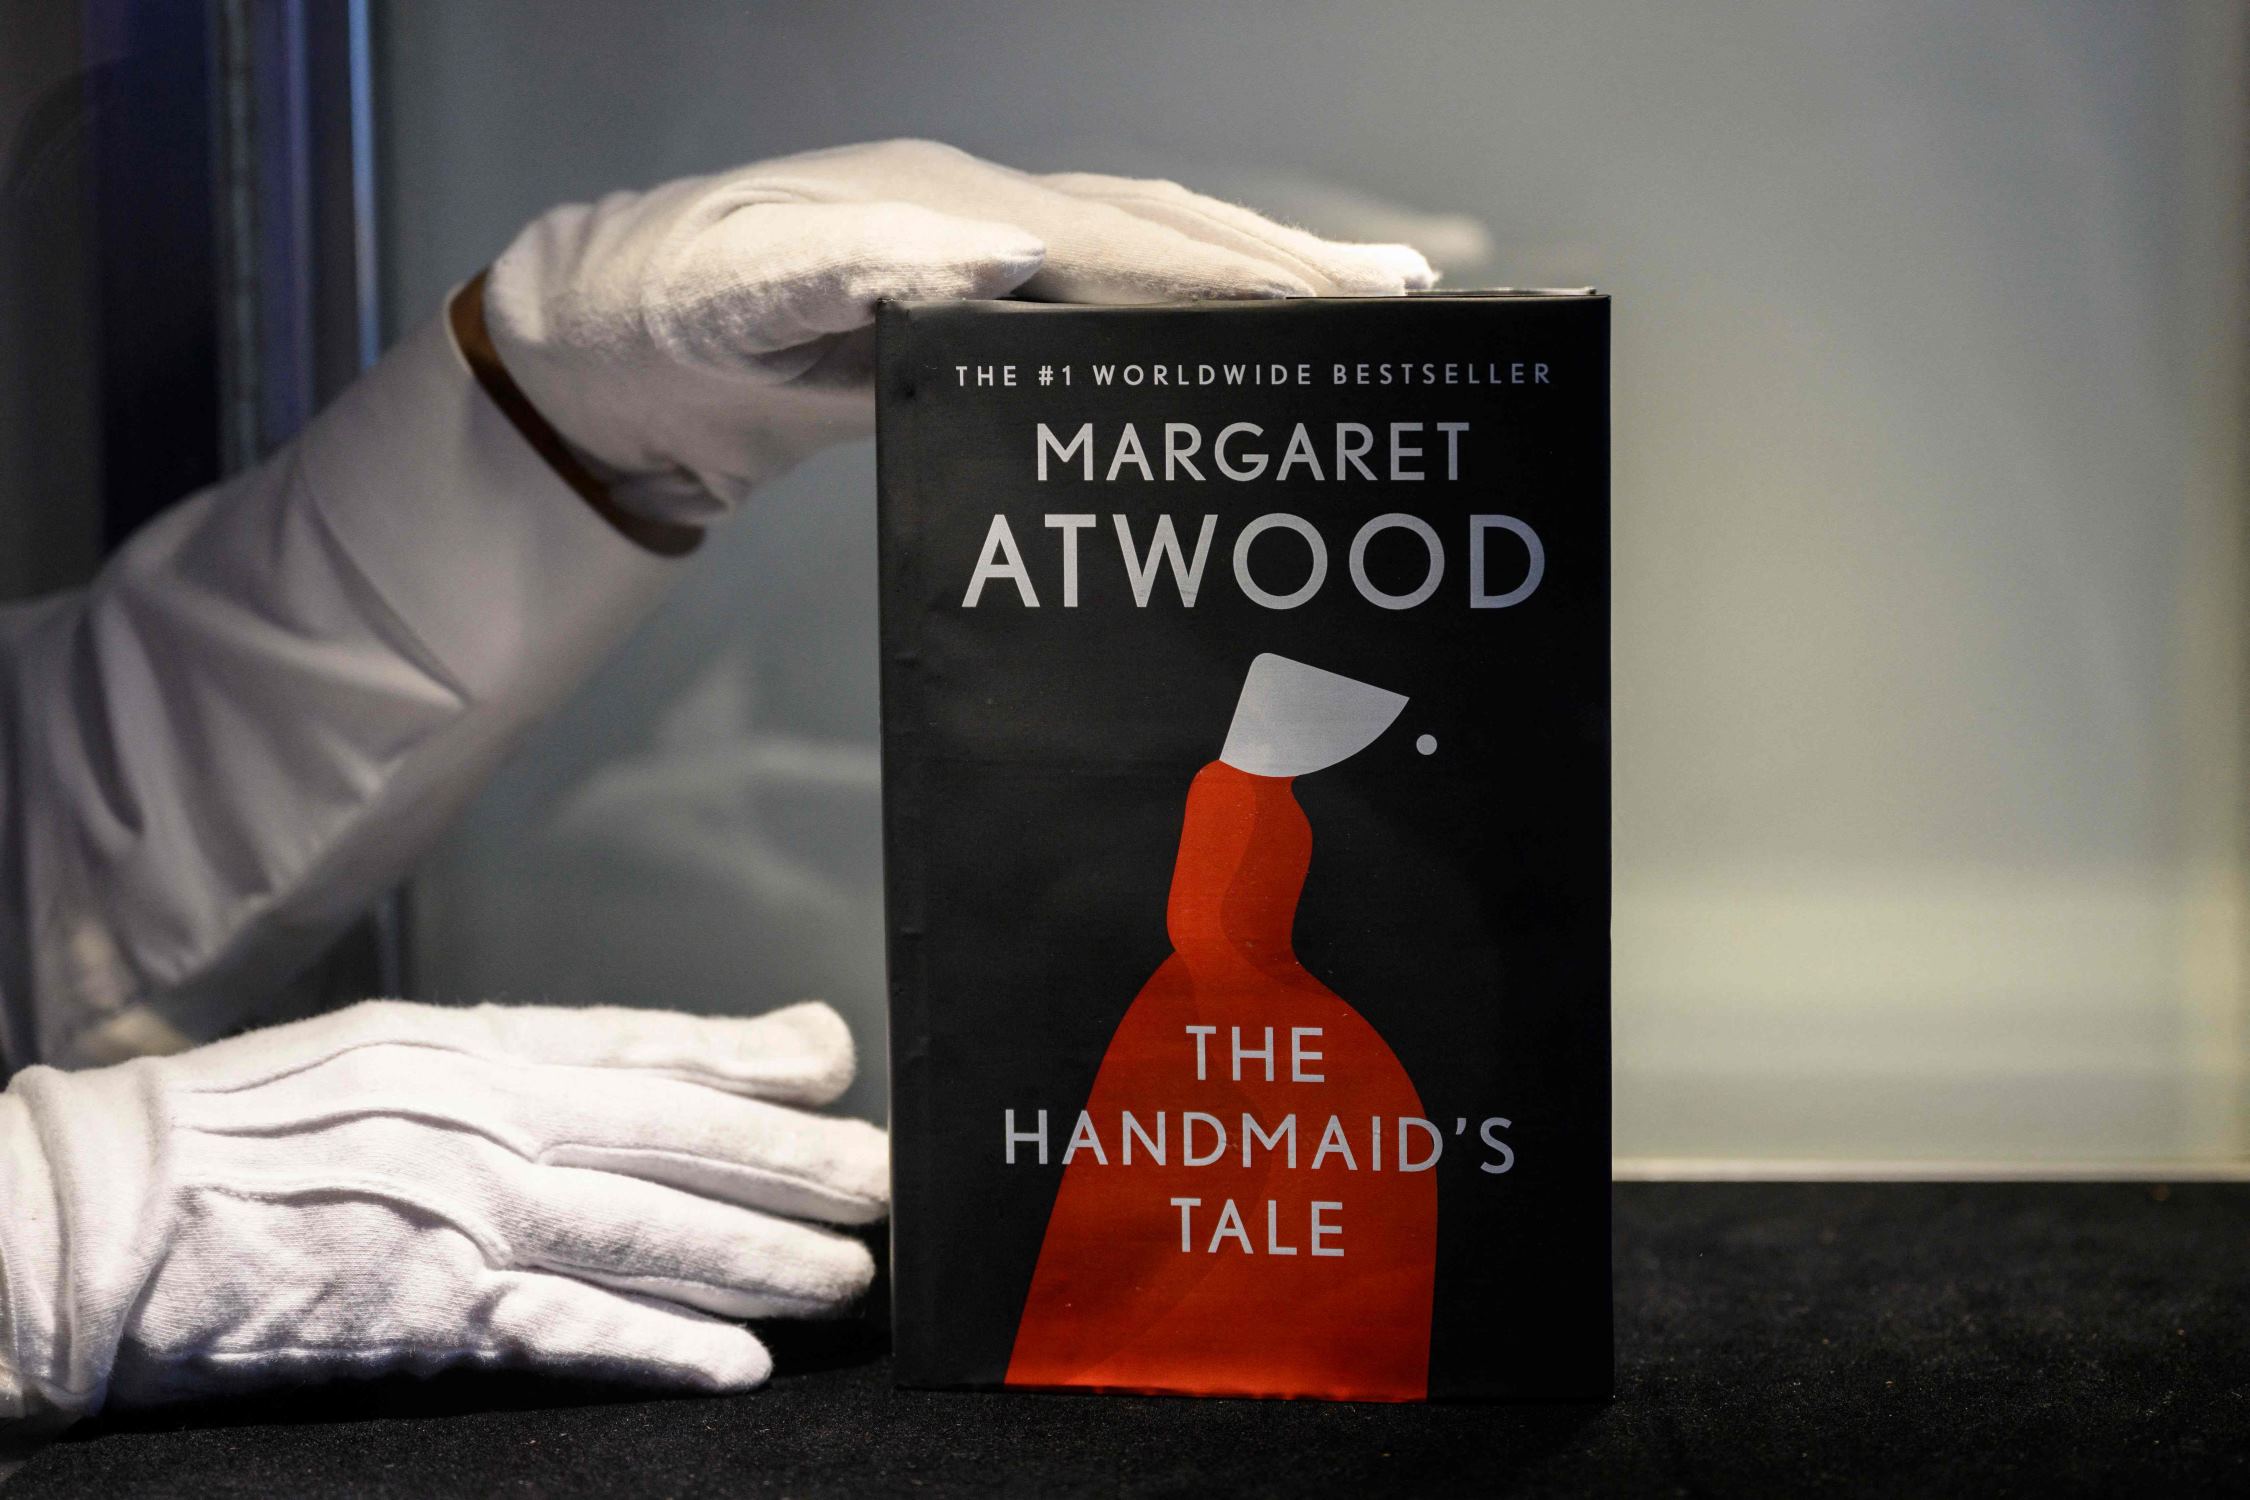 11-astonishing-facts-about-the-handmaids-tale-margaret-atwood